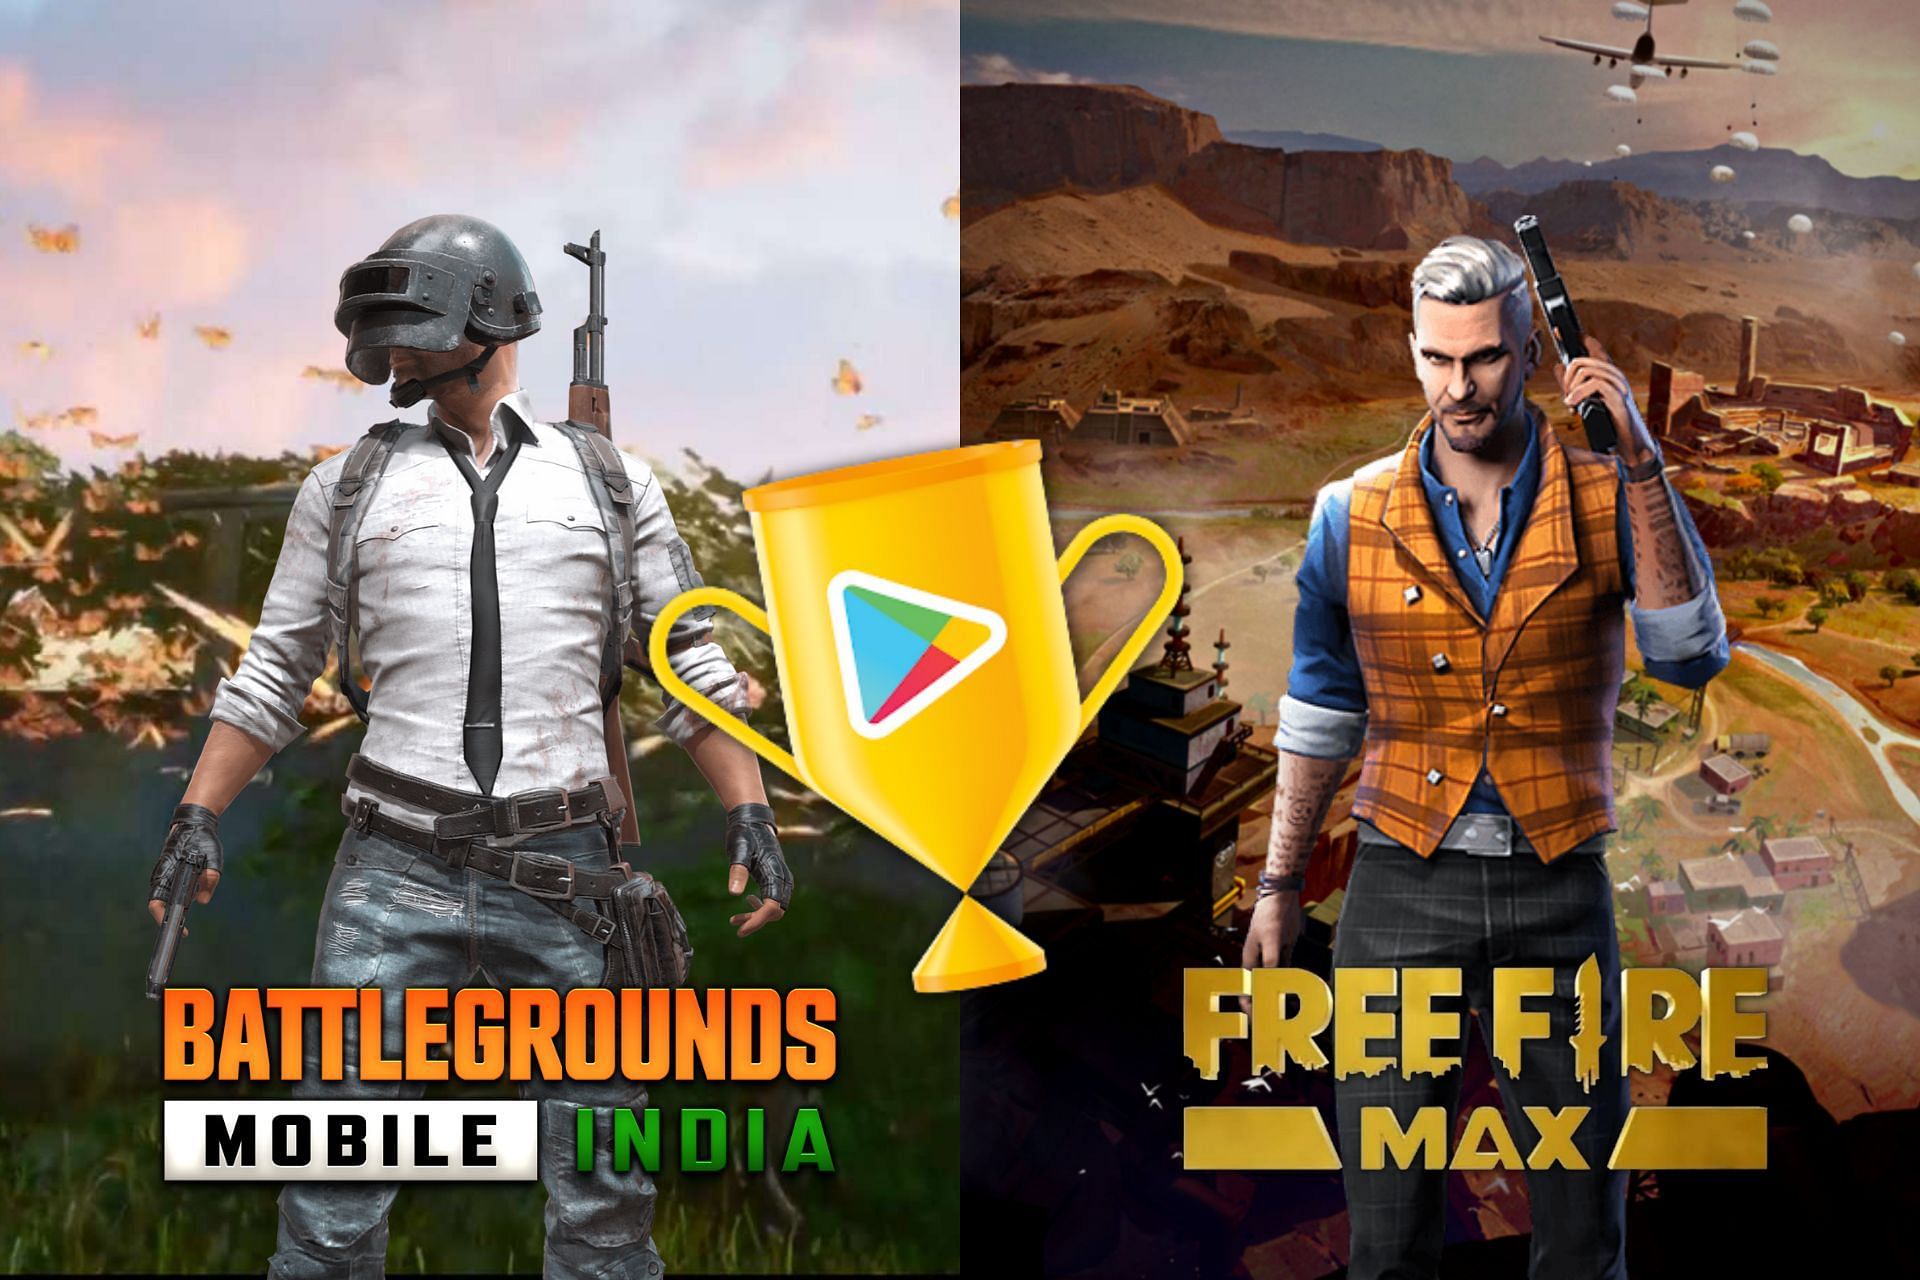 Free Fire voted best game of 2021 on Google Play